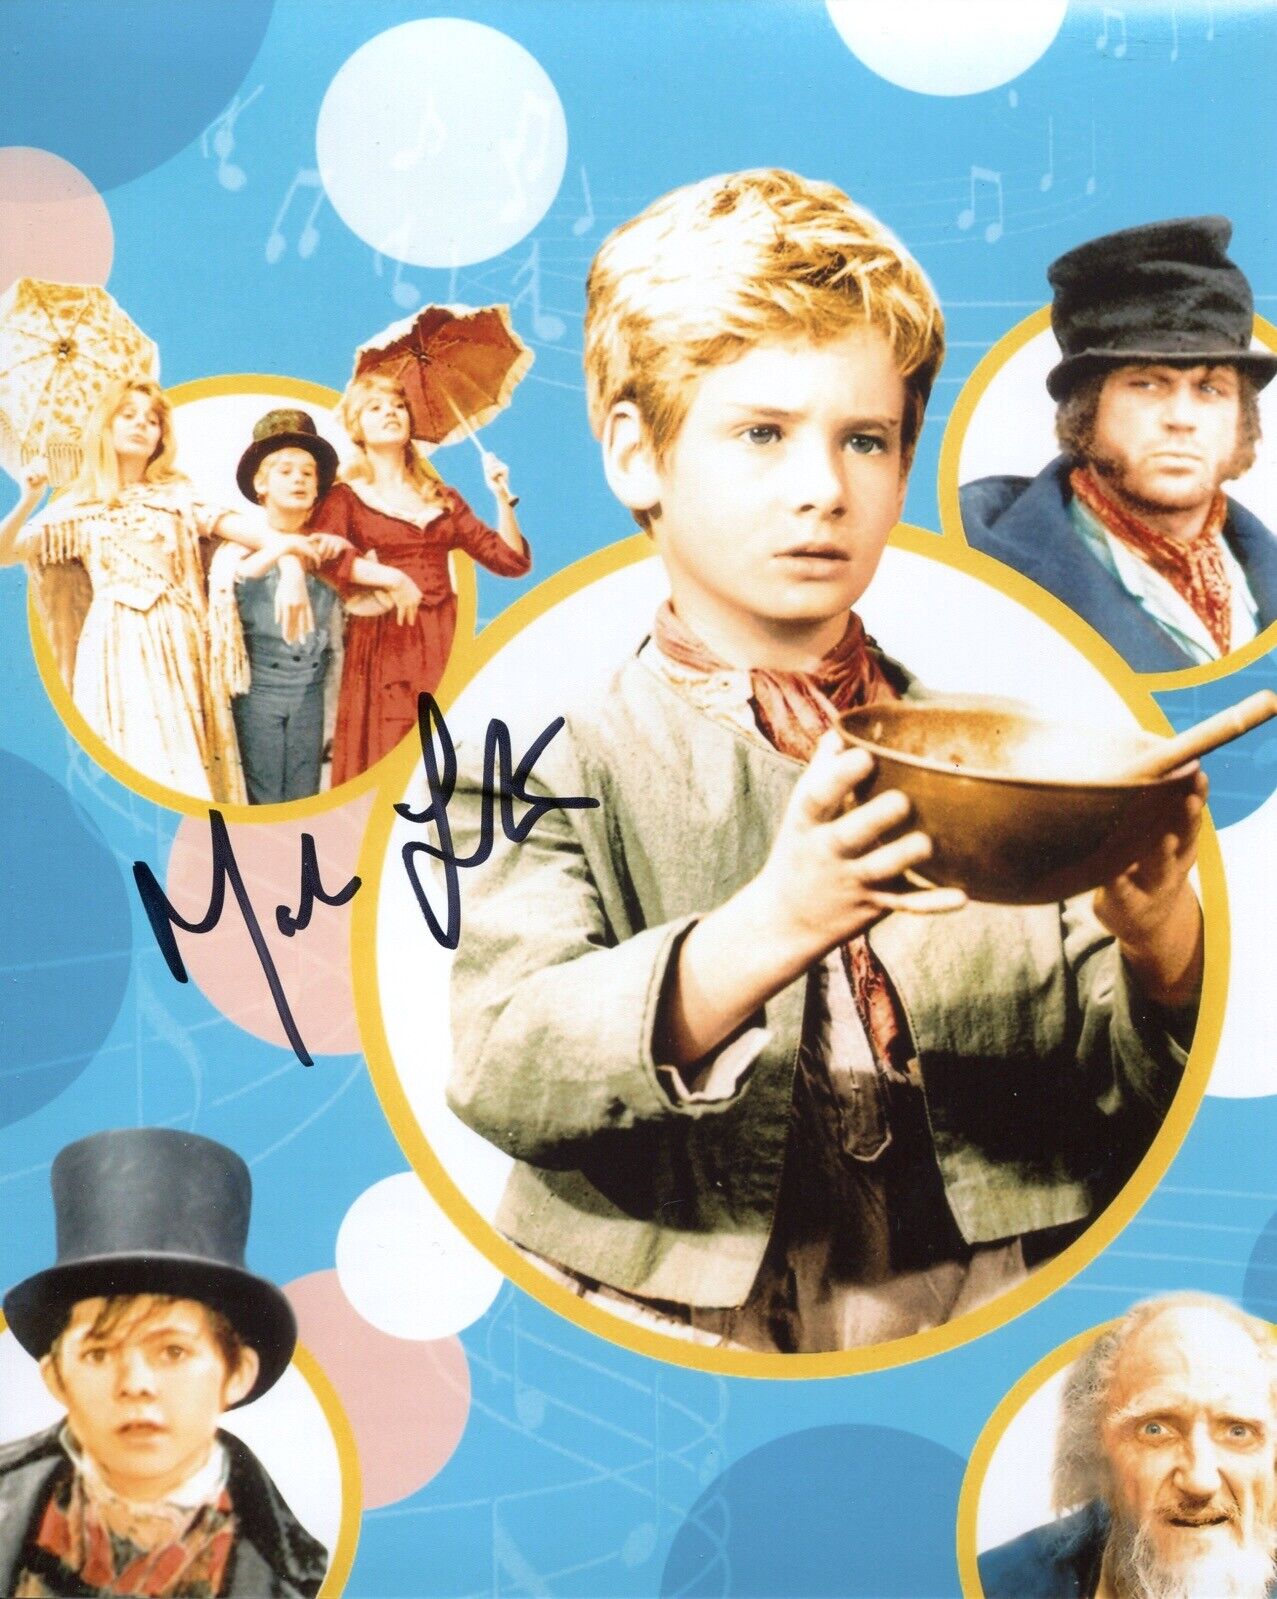 Oliver! movie 8x10 Photo Poster painting signed by actor Mark Lester IMAGE No6